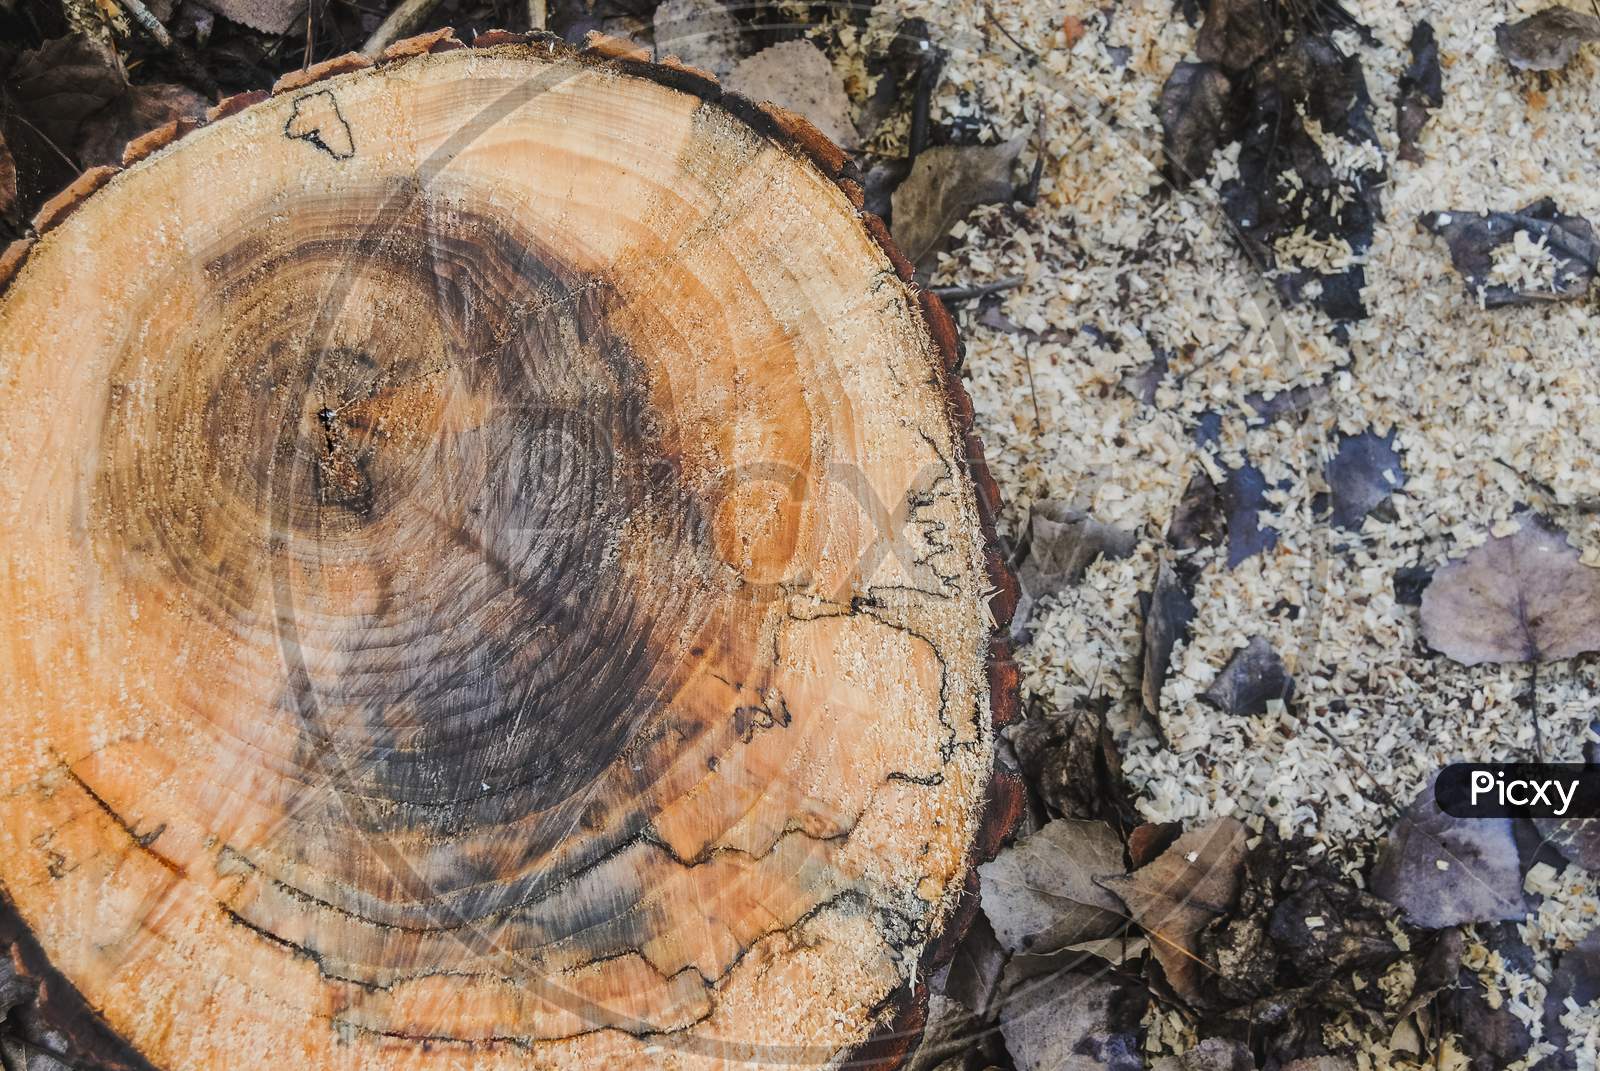 Texture Of A Old Wooden Log With Of Age Lines Marks Surrounded By Wet Leaves And Sawdust